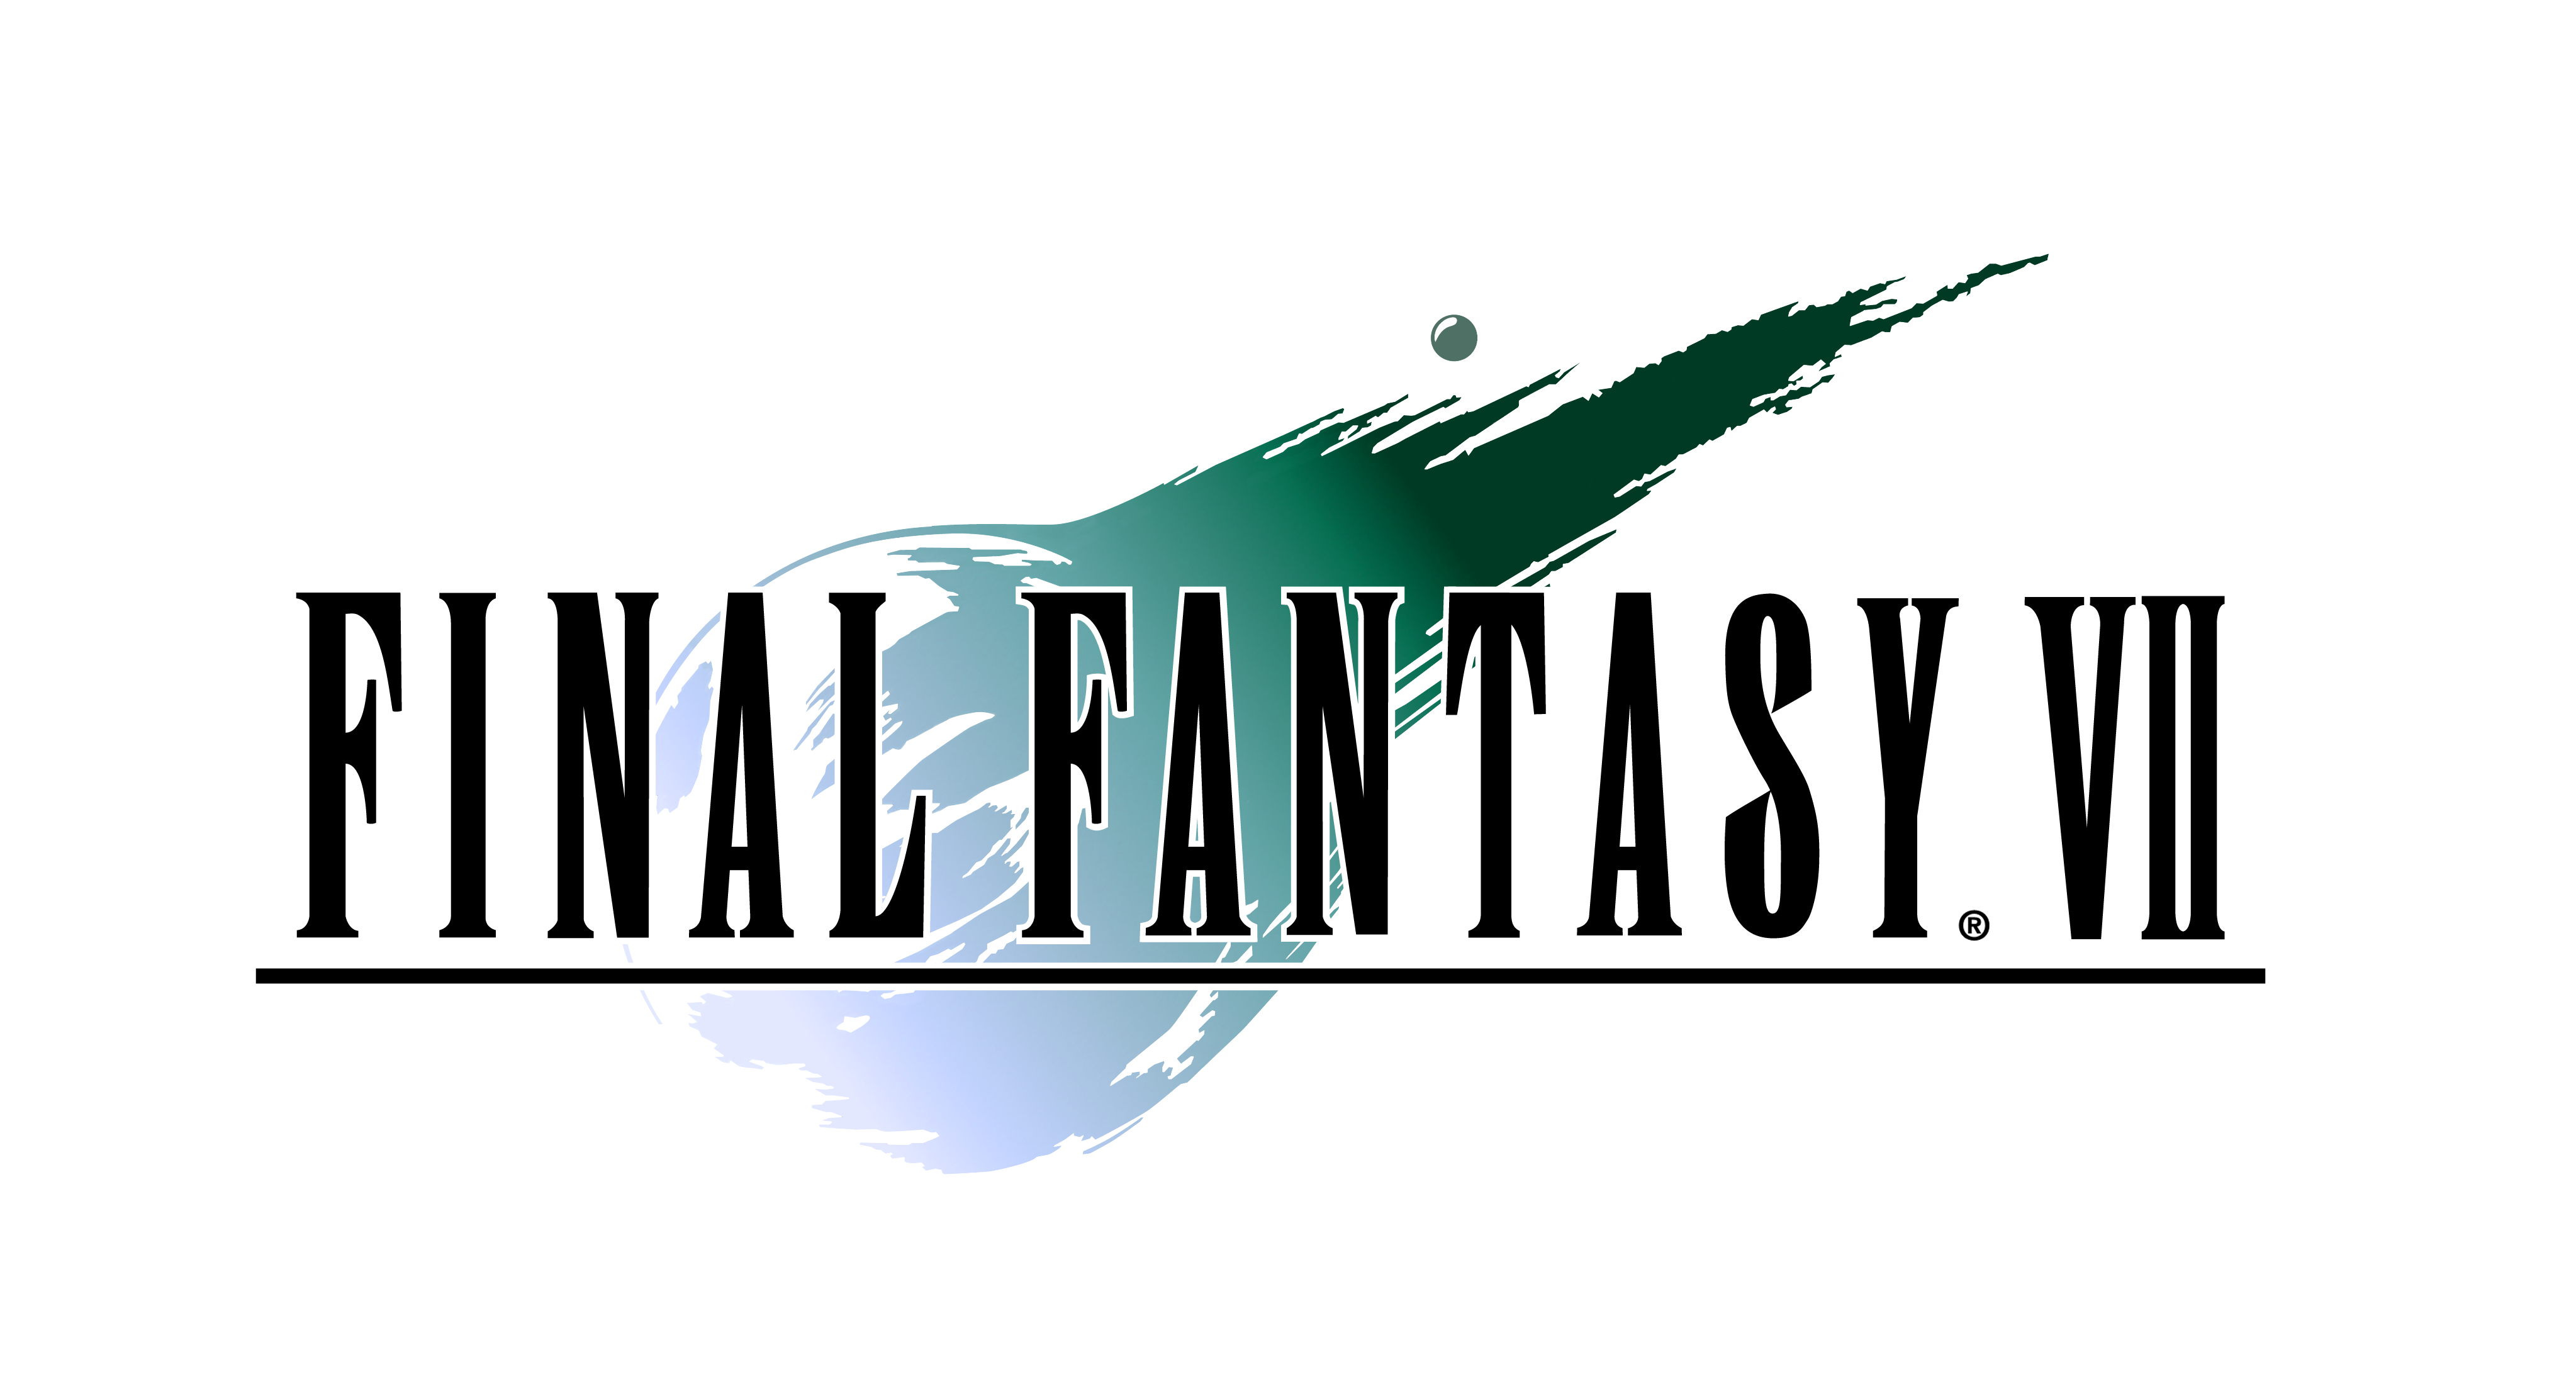  FINAL FANTASY VII  has been inducted into the 2022 World 